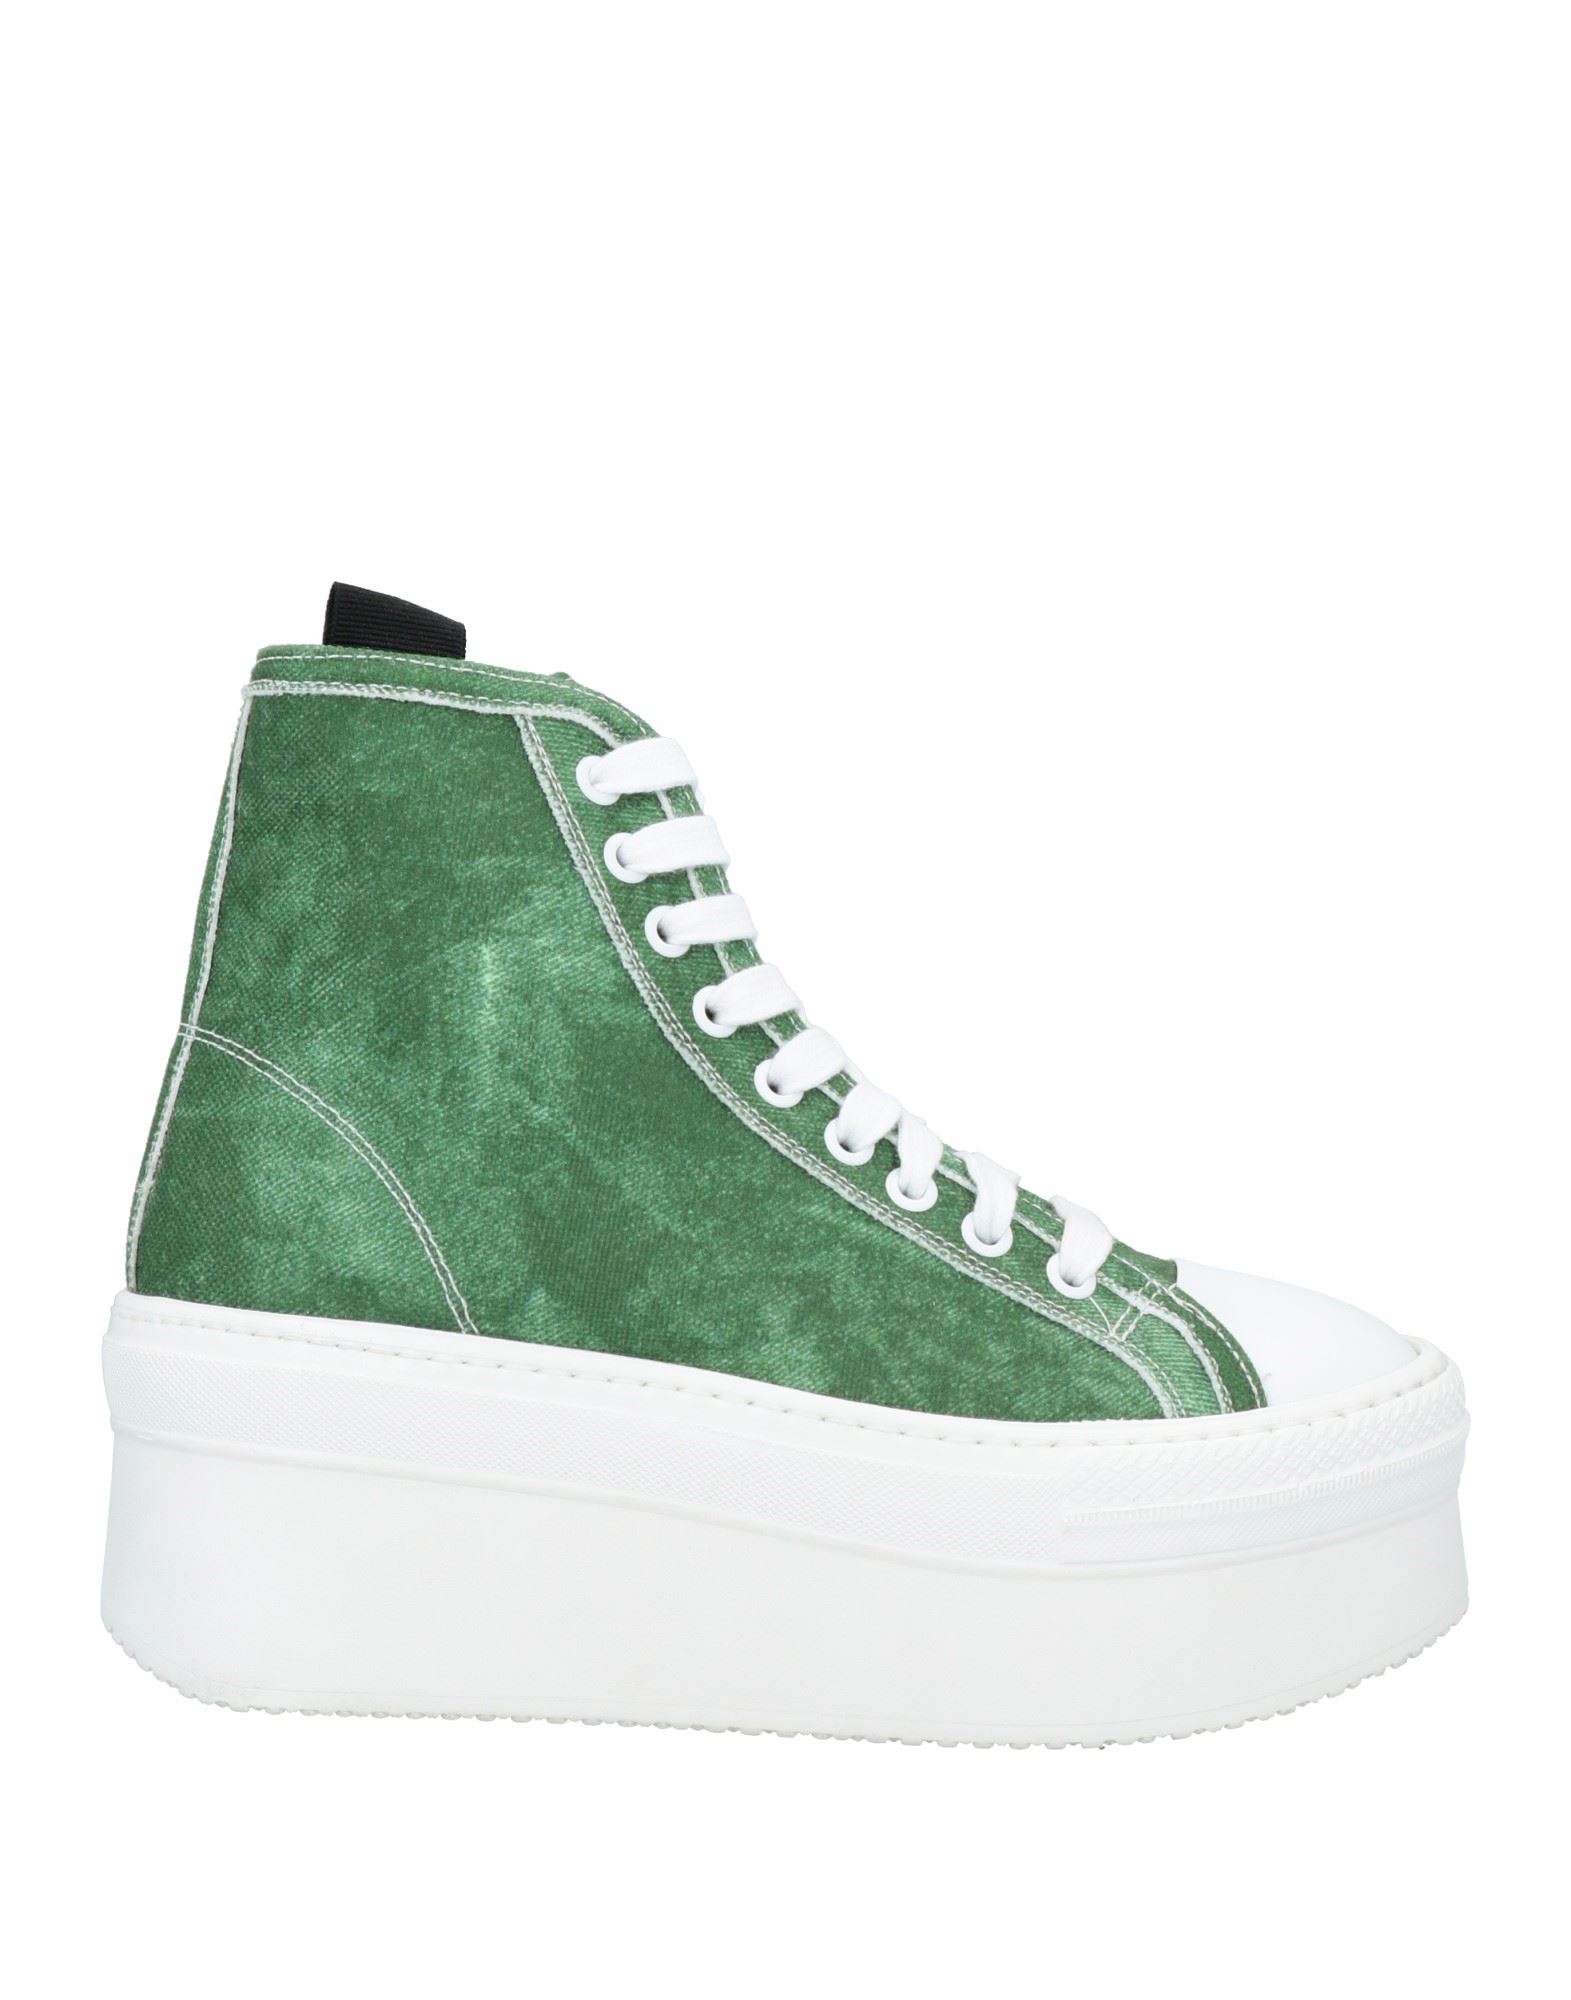 Ovye' By Cristina Lucchi Sneakers In Green